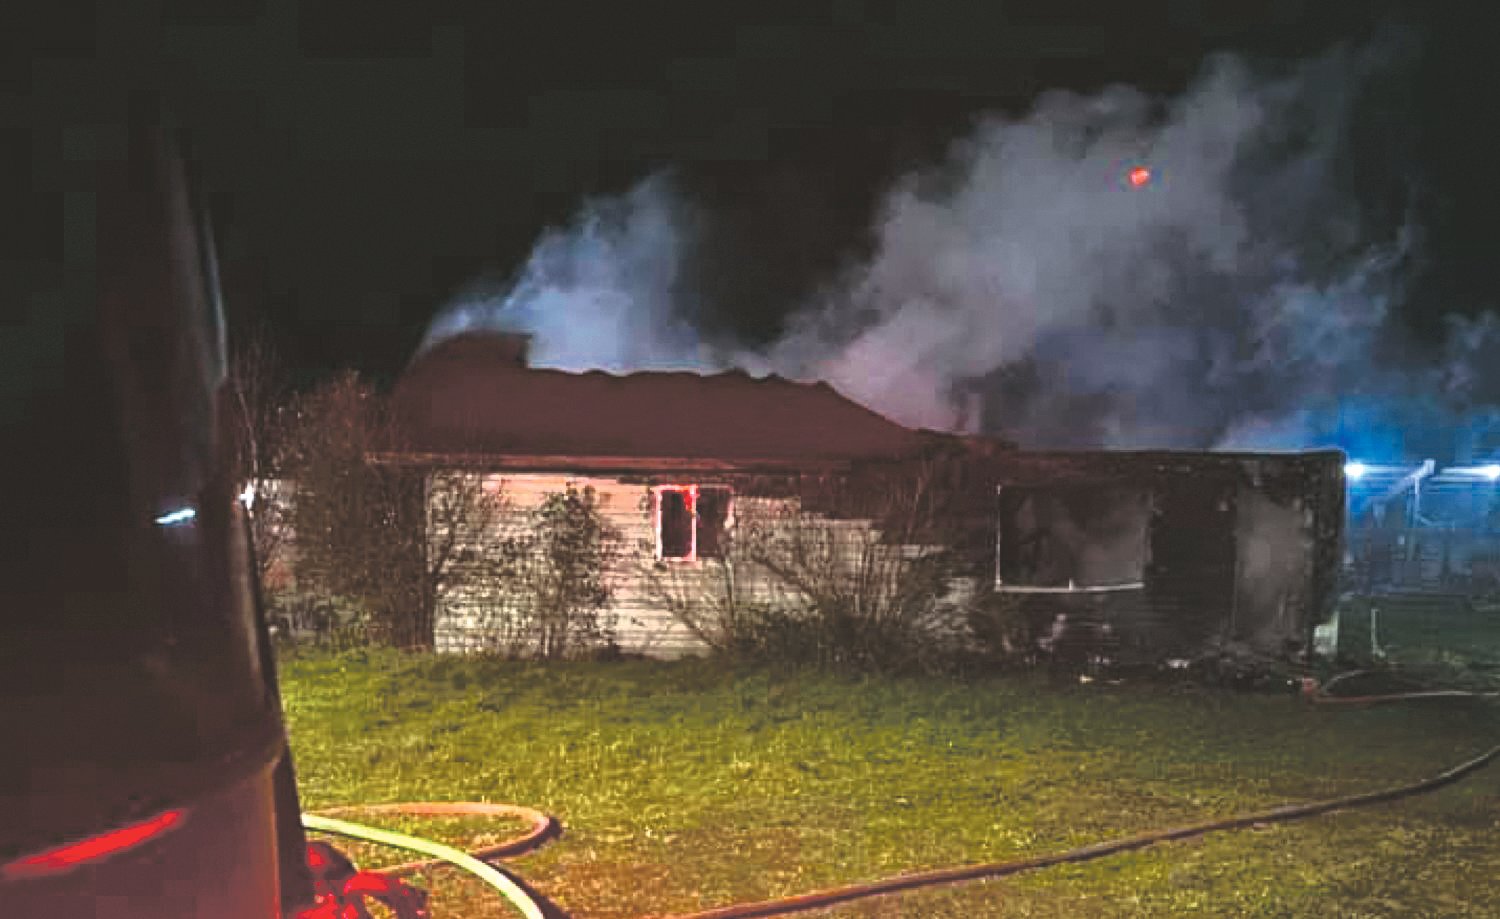 Neighbors reported the fully-involved fire at Waterman’s home in the Goddard area of 163rd Avenue shortly before 4:30 a.m. on Nov. 8 and tried to help on the scene as South Thurston Fire and EMS and West Thurston Fire responded alongside Bucoda Fire and East Olympia Fire. 